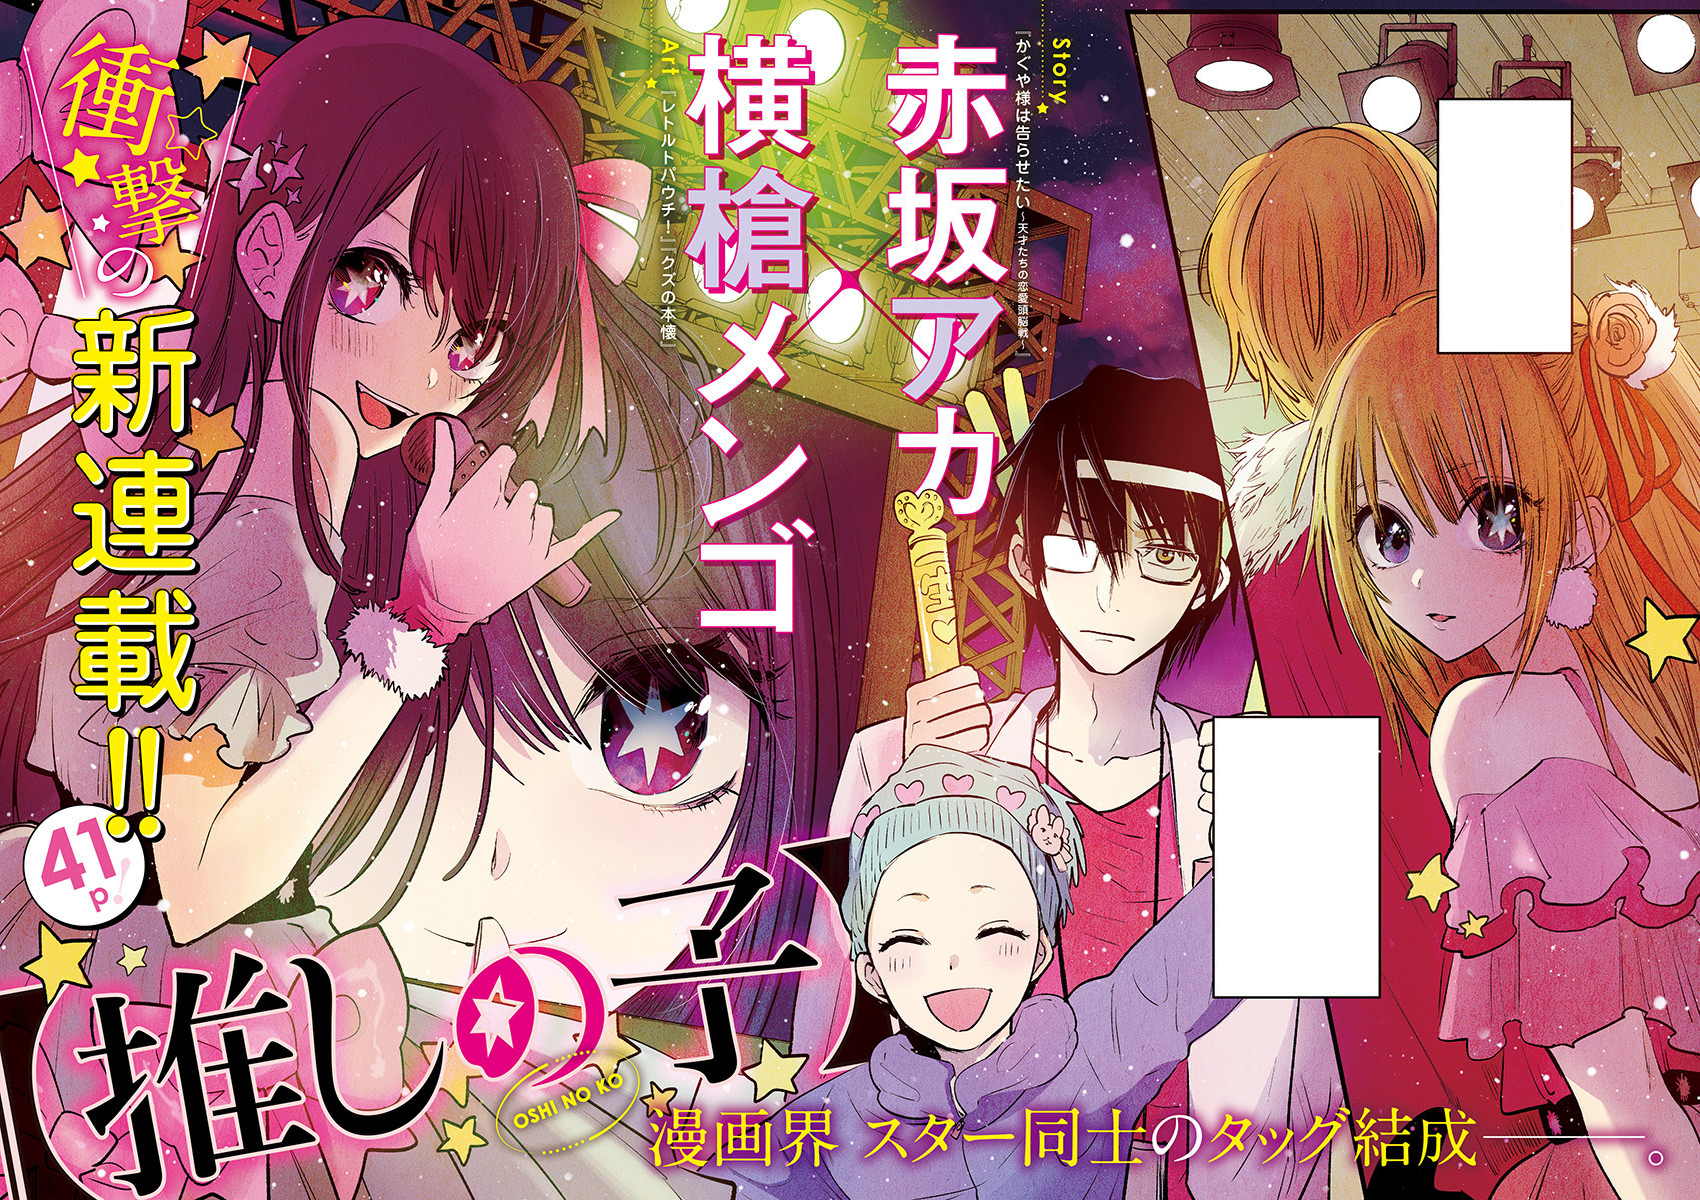 Oshi no Ko chapter 126: Expected release date, what to expect, and